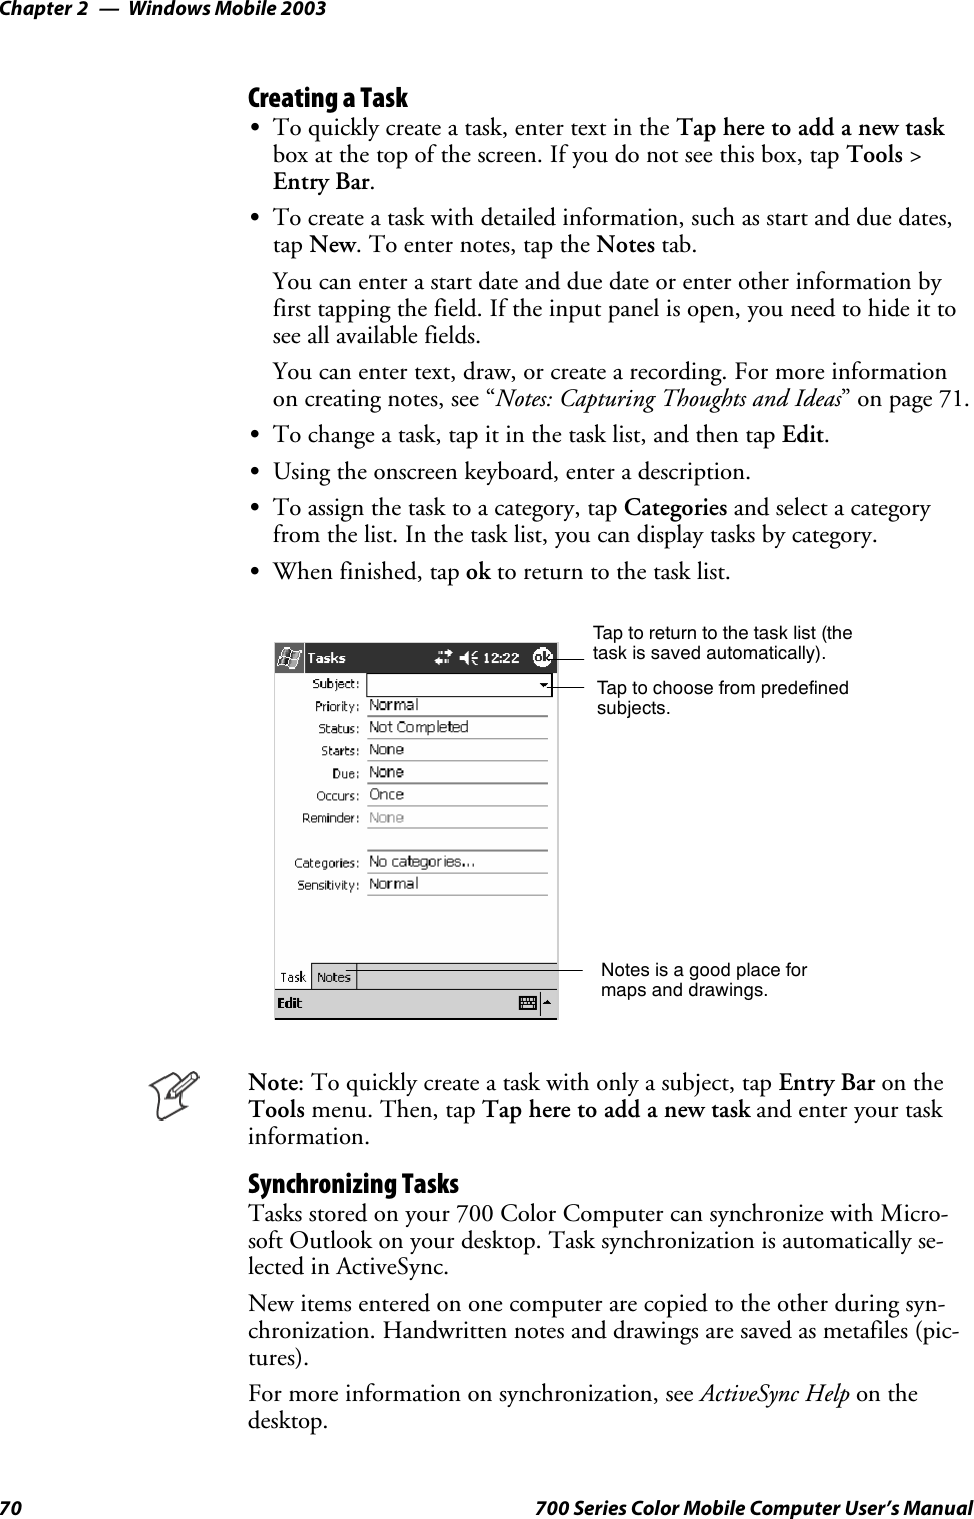 Windows Mobile 2003Chapter —270 700 Series Color Mobile Computer User’s ManualCreating a TaskSTo quickly create a task, enter text in the Tap here to add a new taskbox at the top of the screen. If you do not see this box, tap Tools &gt;Entry Bar.STo create a task with detailed information, such as start and due dates,tap New. To enter notes, tap the Notes tab.You can enter a start date and due date or enter other information byfirst tapping the field. If the input panel is open, you need to hide it tosee all available fields.You can enter text, draw, or create a recording. For more informationon creating notes, see “Notes: Capturing Thoughts and Ideas” on page 71.STo change a task, tap it in the task list, and then tap Edit.SUsing the onscreen keyboard, enter a description.STo assign the task to a category, tap Categories and select a categoryfrom the list. In the task list, you can display tasks by category.SWhen finished, tap ok to return to the task list.Taptoreturntothetasklist(thetask is saved automatically).Tap to choose from predefinedsubjects.Notes is a good place formaps and drawings.Note: To quickly create a task with only a subject, tap Entry Bar on theTools menu. Then, tap Tap here to add a new task and enter your taskinformation.Synchronizing TasksTasks stored on your 700 Color Computer can synchronize with Micro-soft Outlook on your desktop. Task synchronization is automatically se-lected in ActiveSync.New items entered on one computer are copied to the other during syn-chronization. Handwritten notes and drawings are saved as metafiles (pic-tures).For more information on synchronization, see ActiveSync Help on thedesktop.